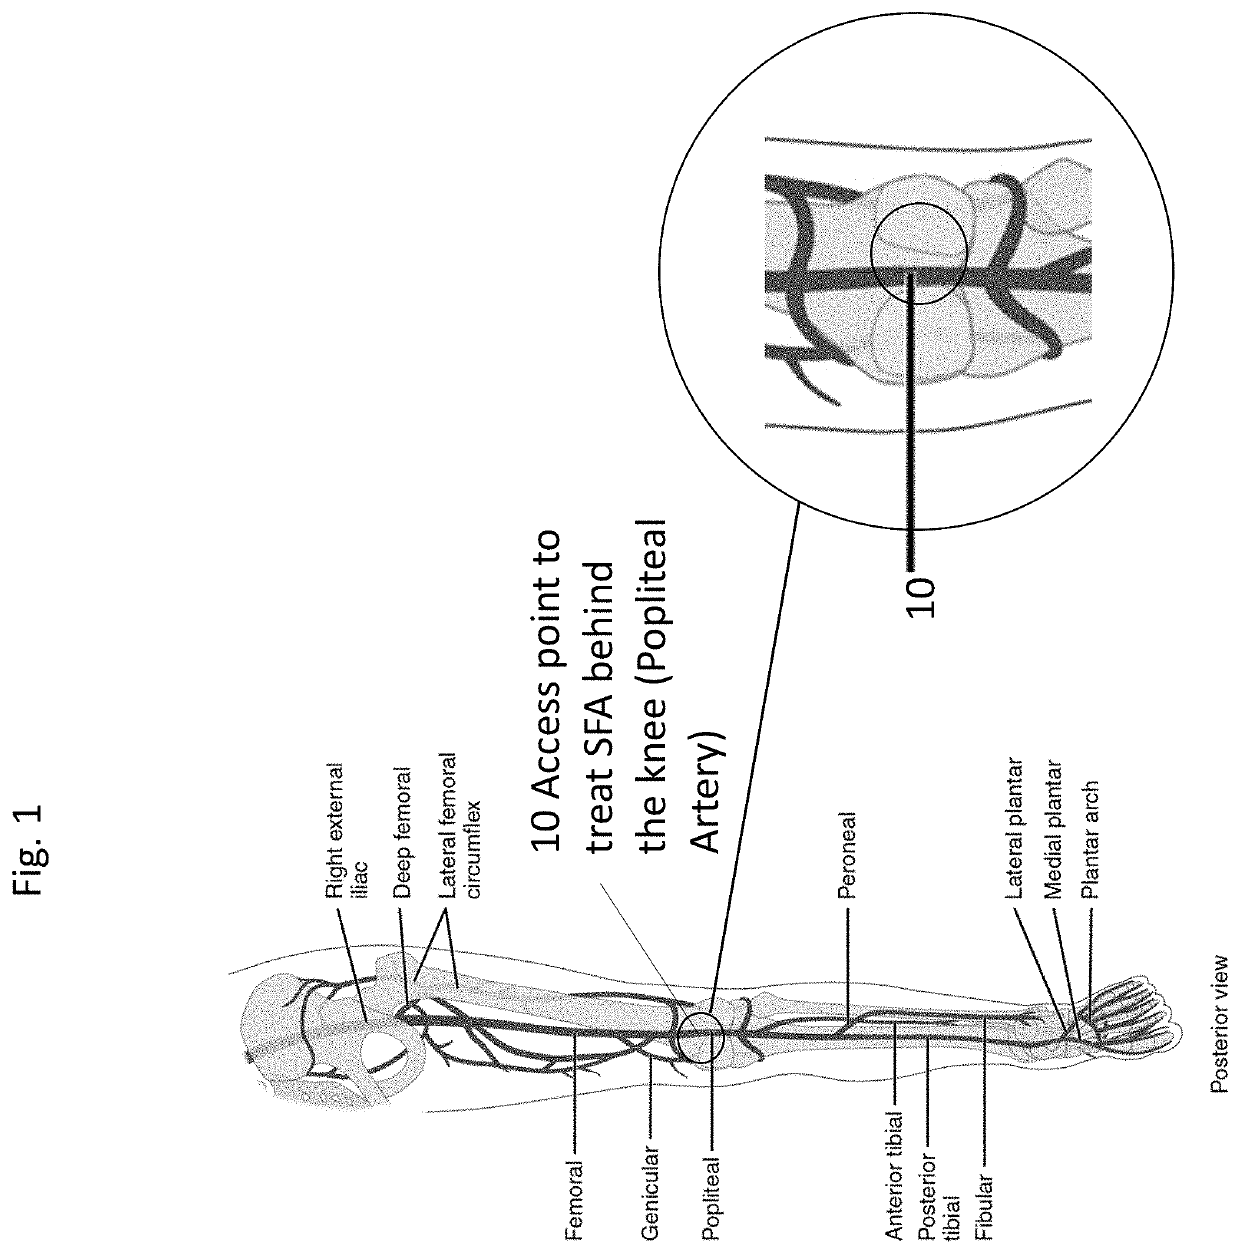 System and method for treatment of the claudification of the superficial femoral and proximal popliteal artery